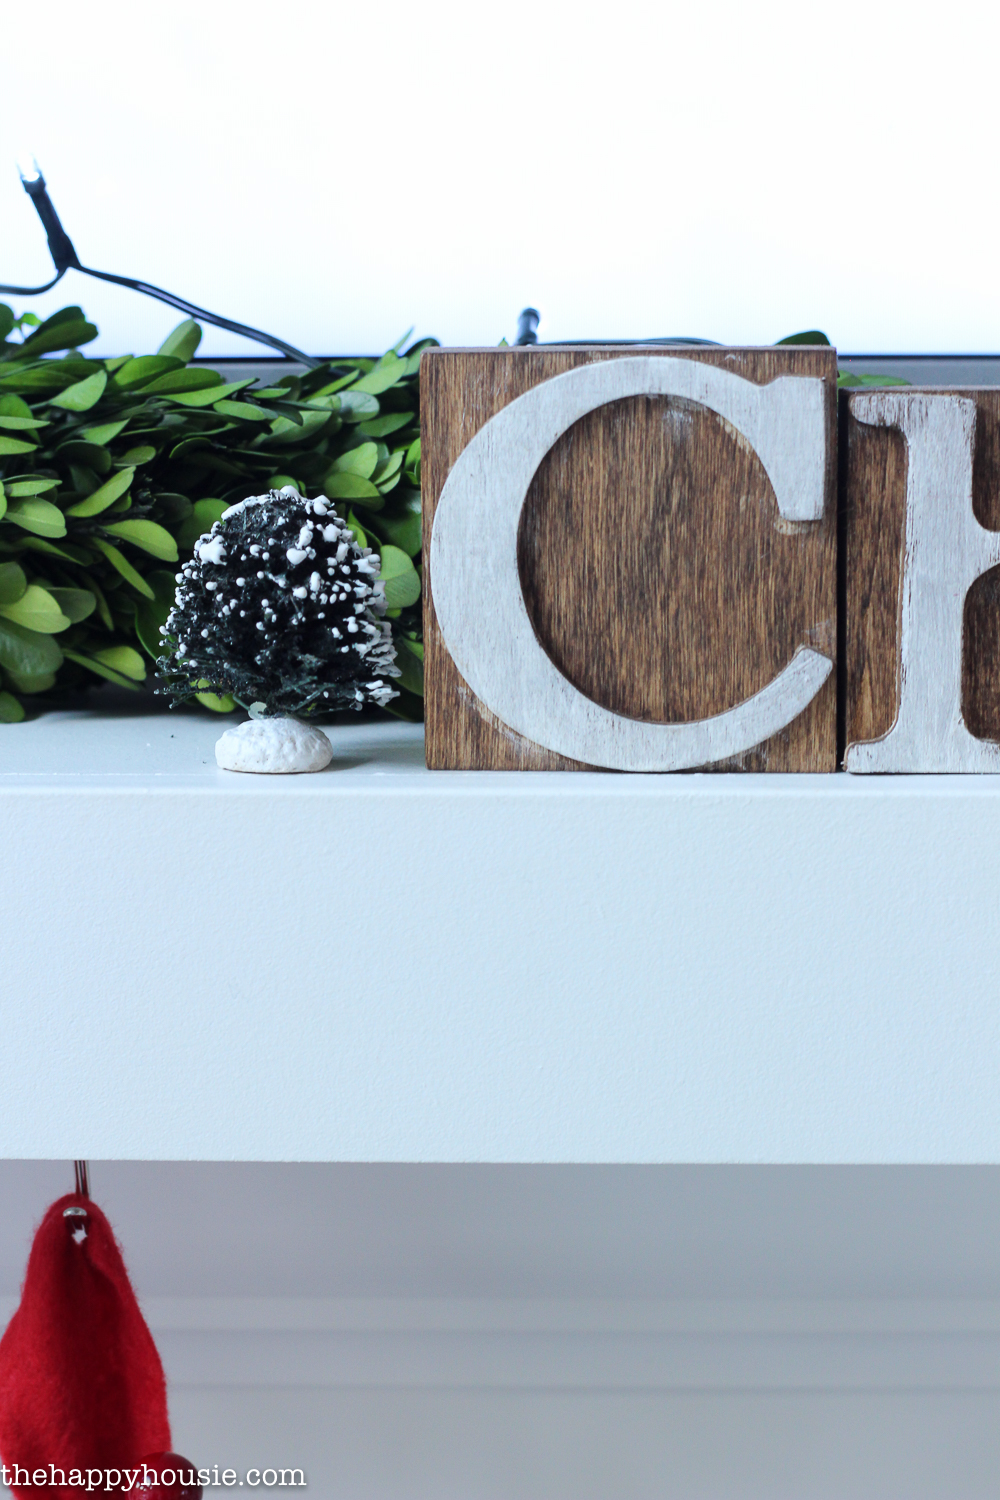 A wooden Christmas sign is on the mantel.